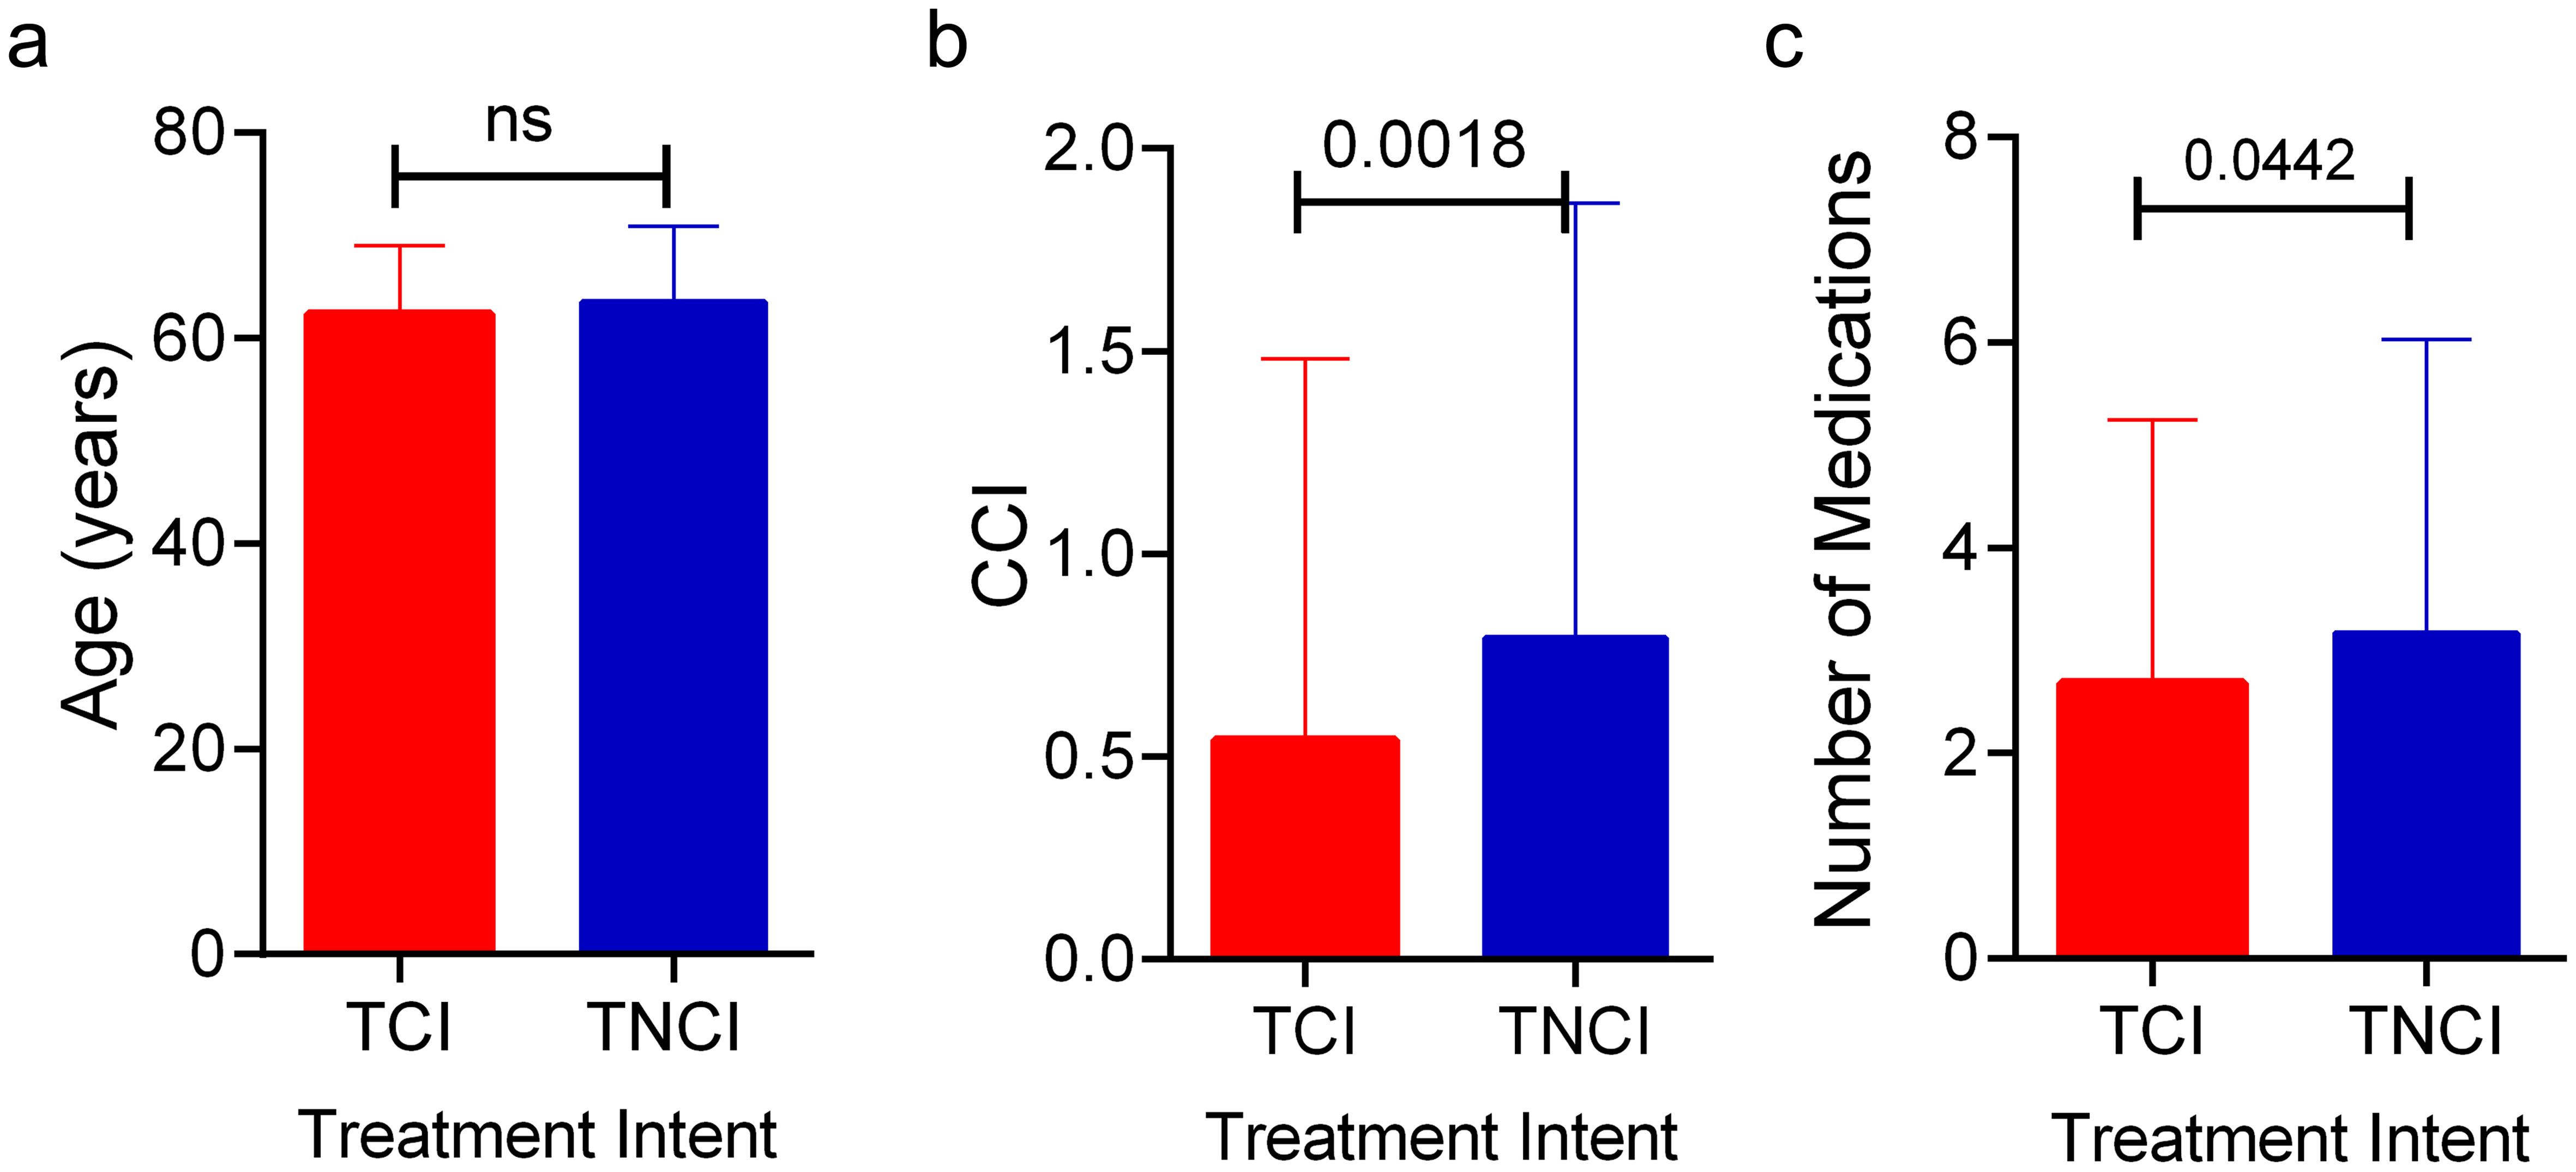 Influence of patient factors including age (a), co-morbidities (b), as indicated by the CCI and number of medications (c) on treatment intent.